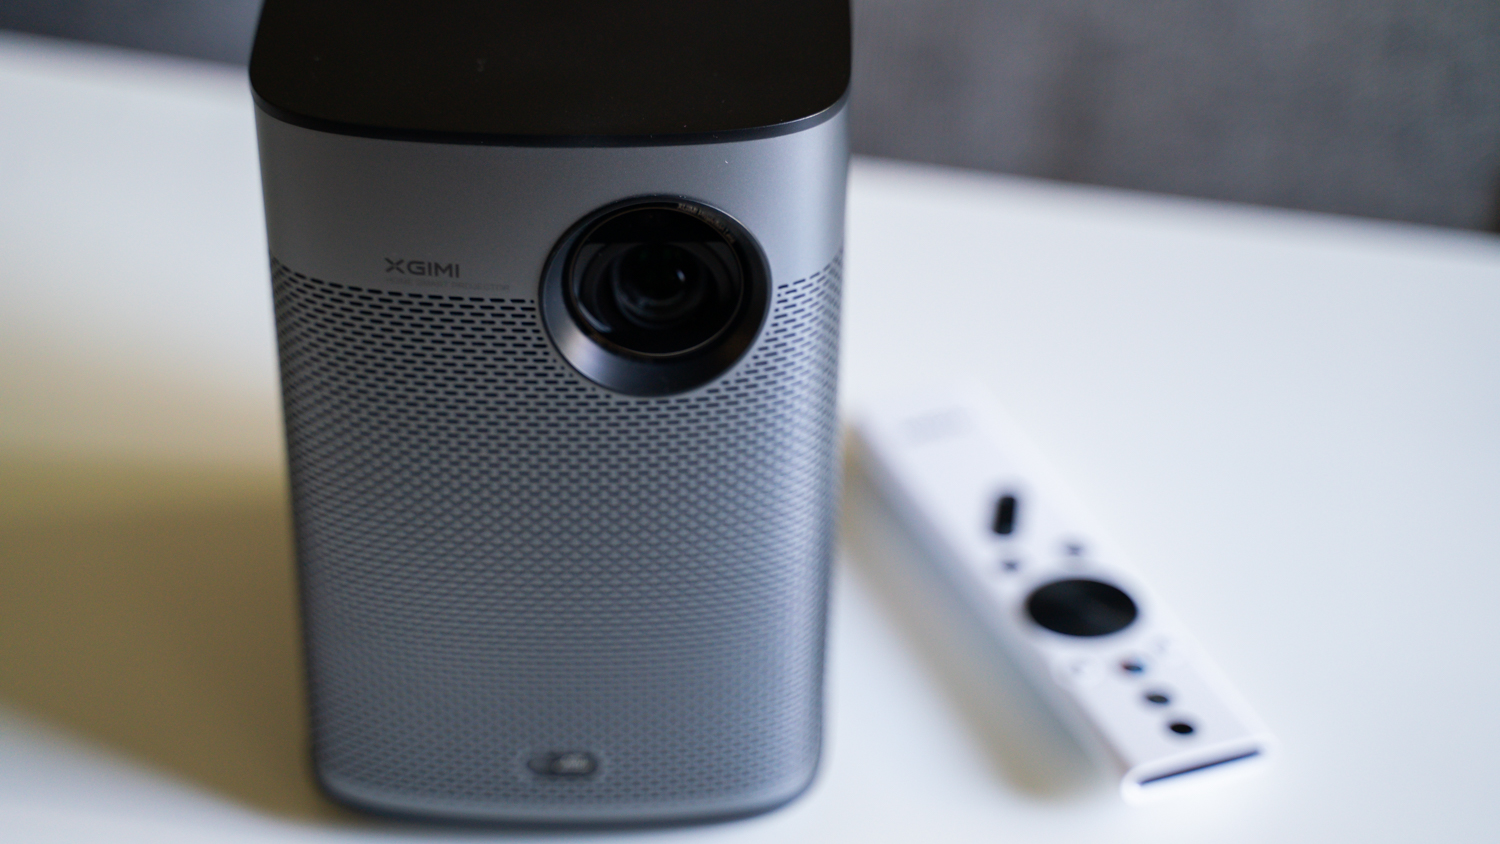 Xgimi Halo+ smart projector | review: projector perfect a T3 practically smart